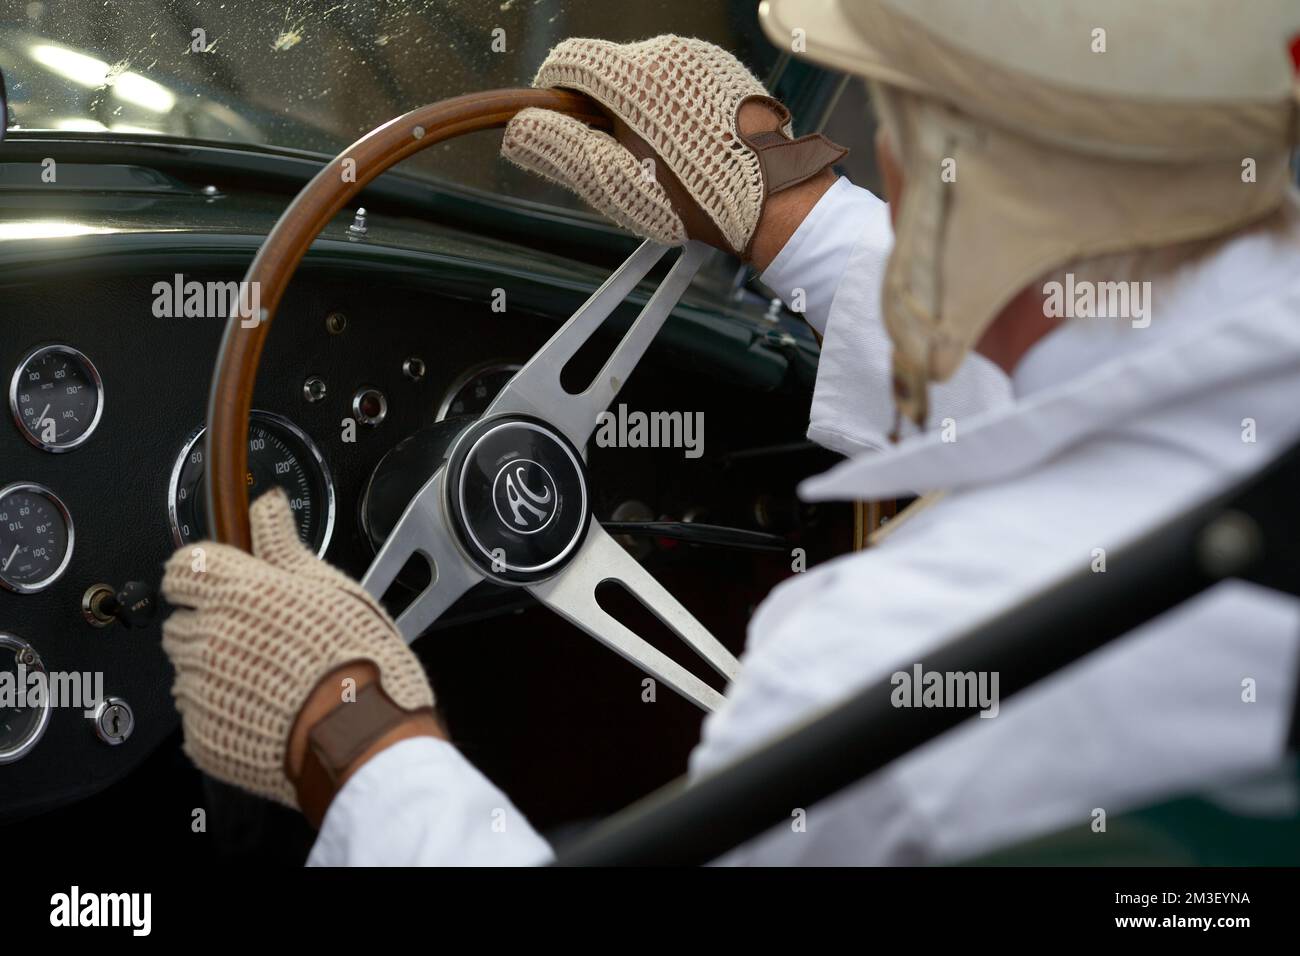 Hands on steering wheel of a car driving.Hands of a man in classic English leather driving gloves in classic car . Stock Photo